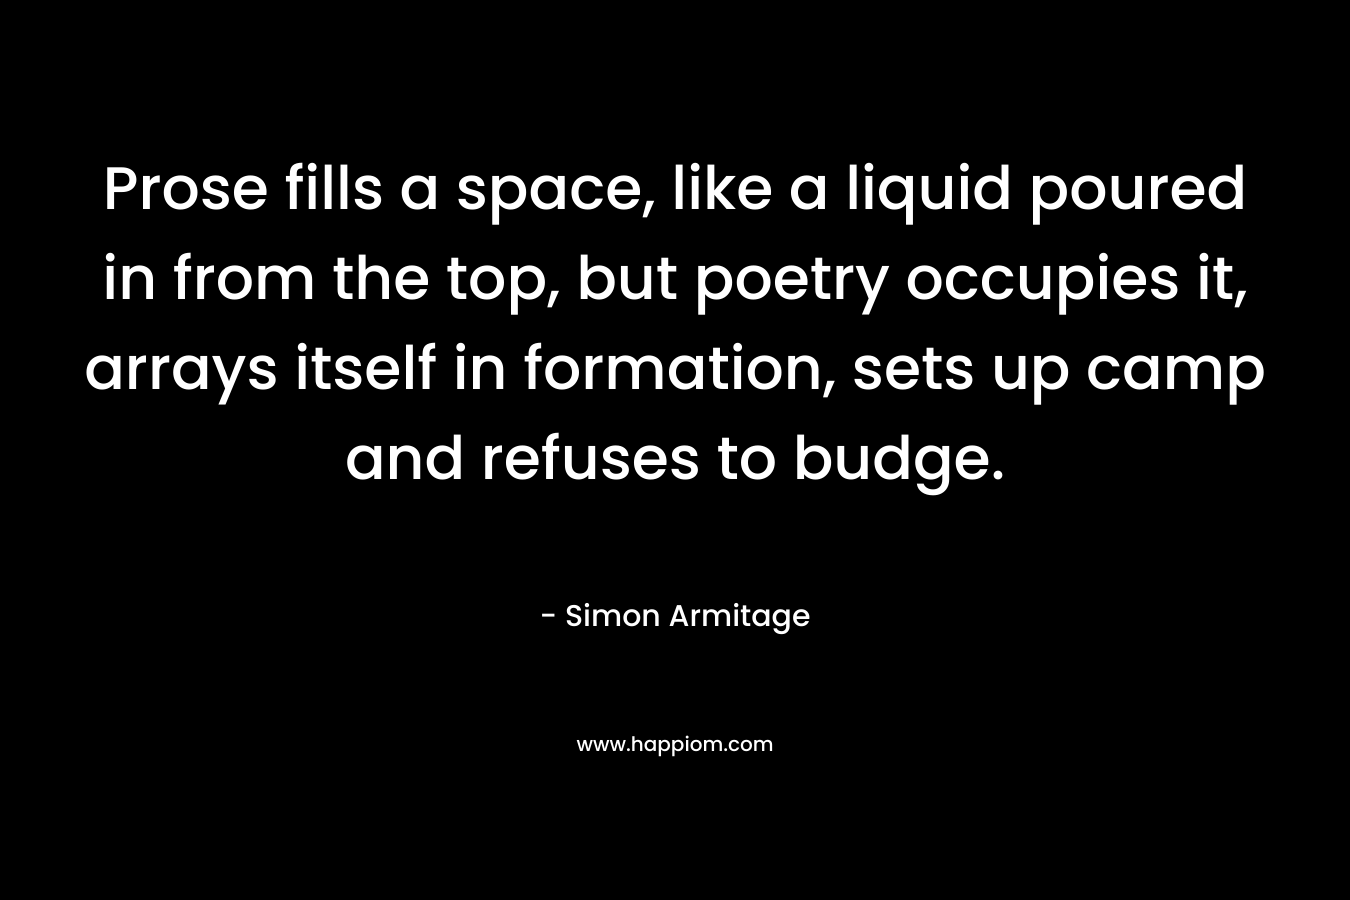 Prose fills a space, like a liquid poured in from the top, but poetry occupies it, arrays itself in formation, sets up camp and refuses to budge. – Simon Armitage